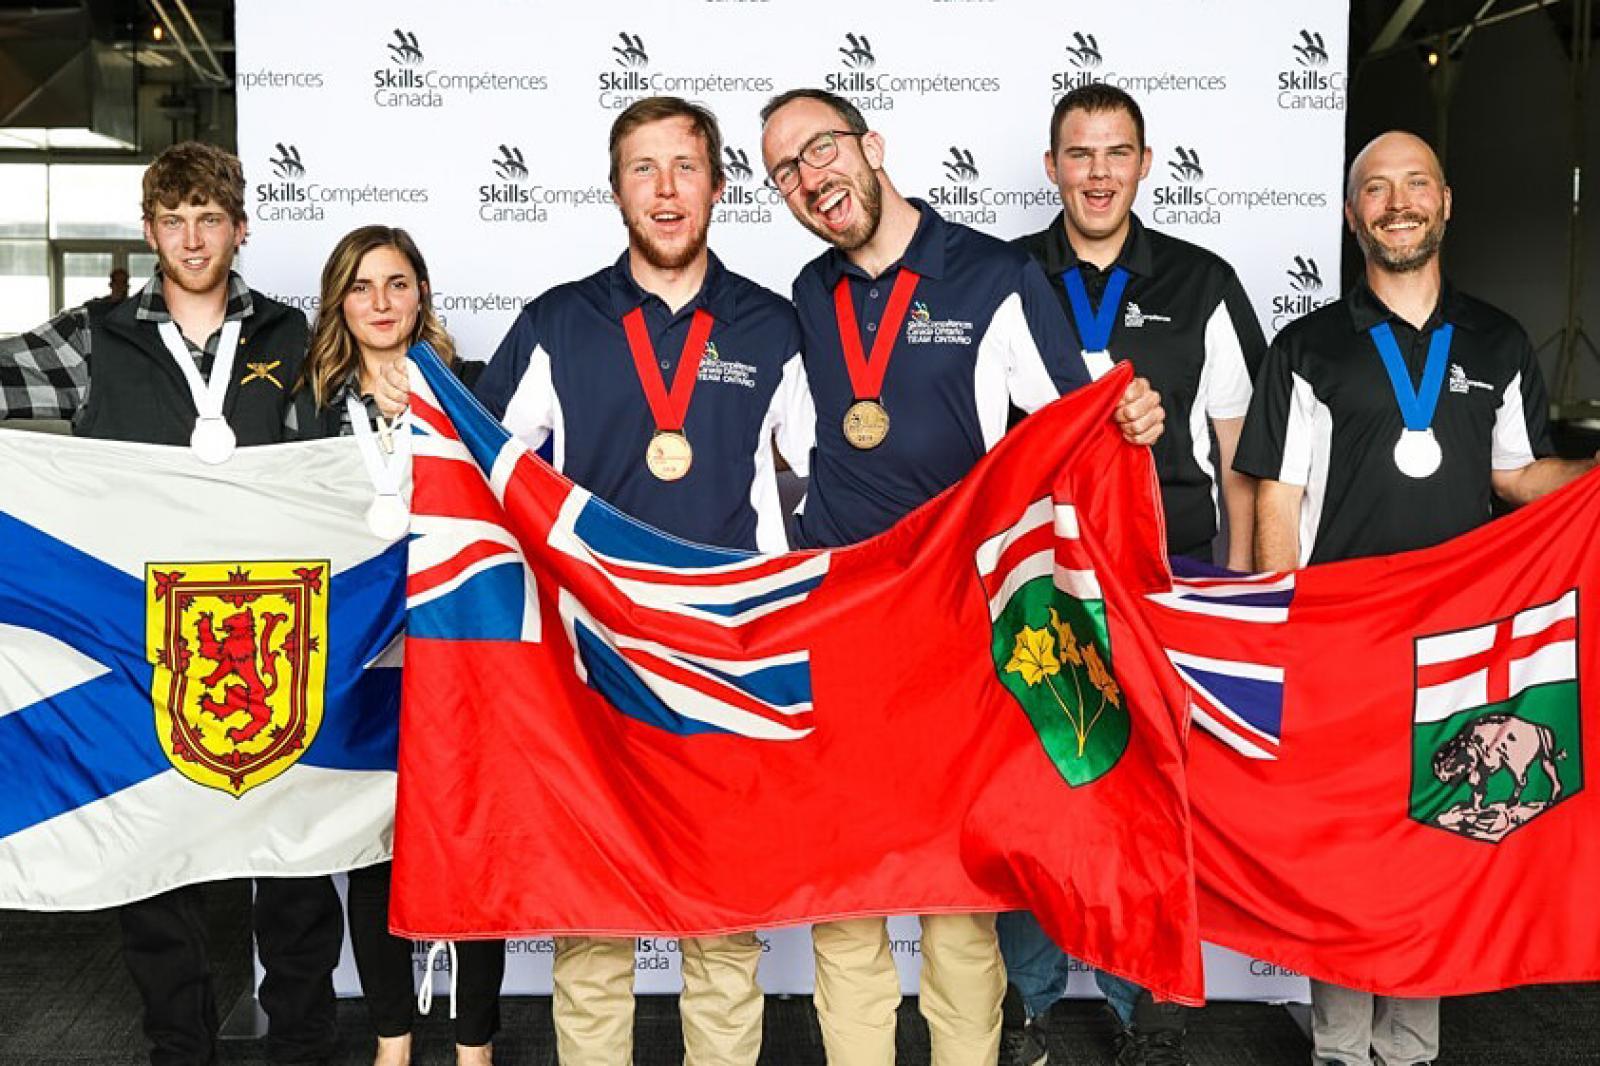 Thomas Hawley and Blaise Mombourguette (centre) hold the Ontario flag at the Skills Canada winners podium.